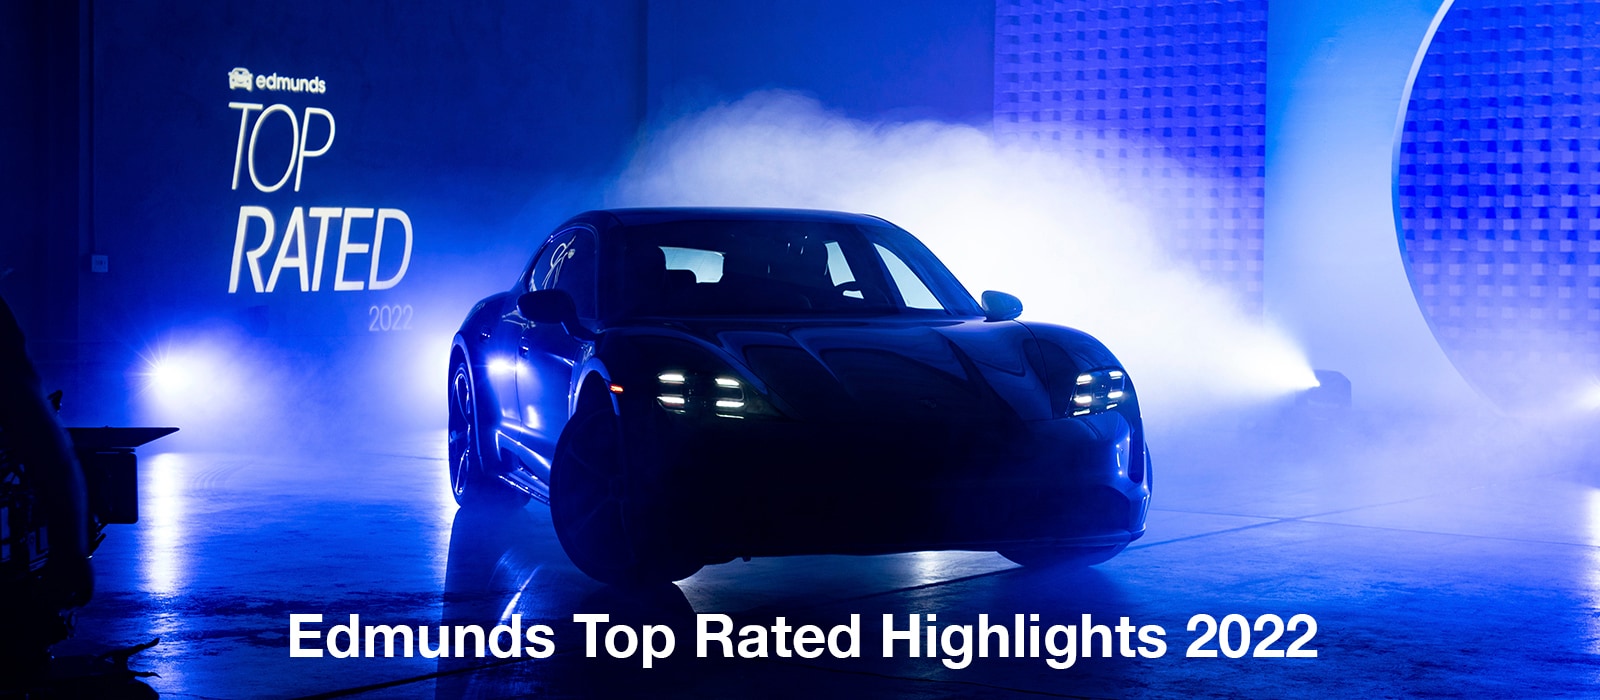 Edmunds Top Rated Awards 2022 | The Best SUVs, Cars, Trucks and EVs for 2022